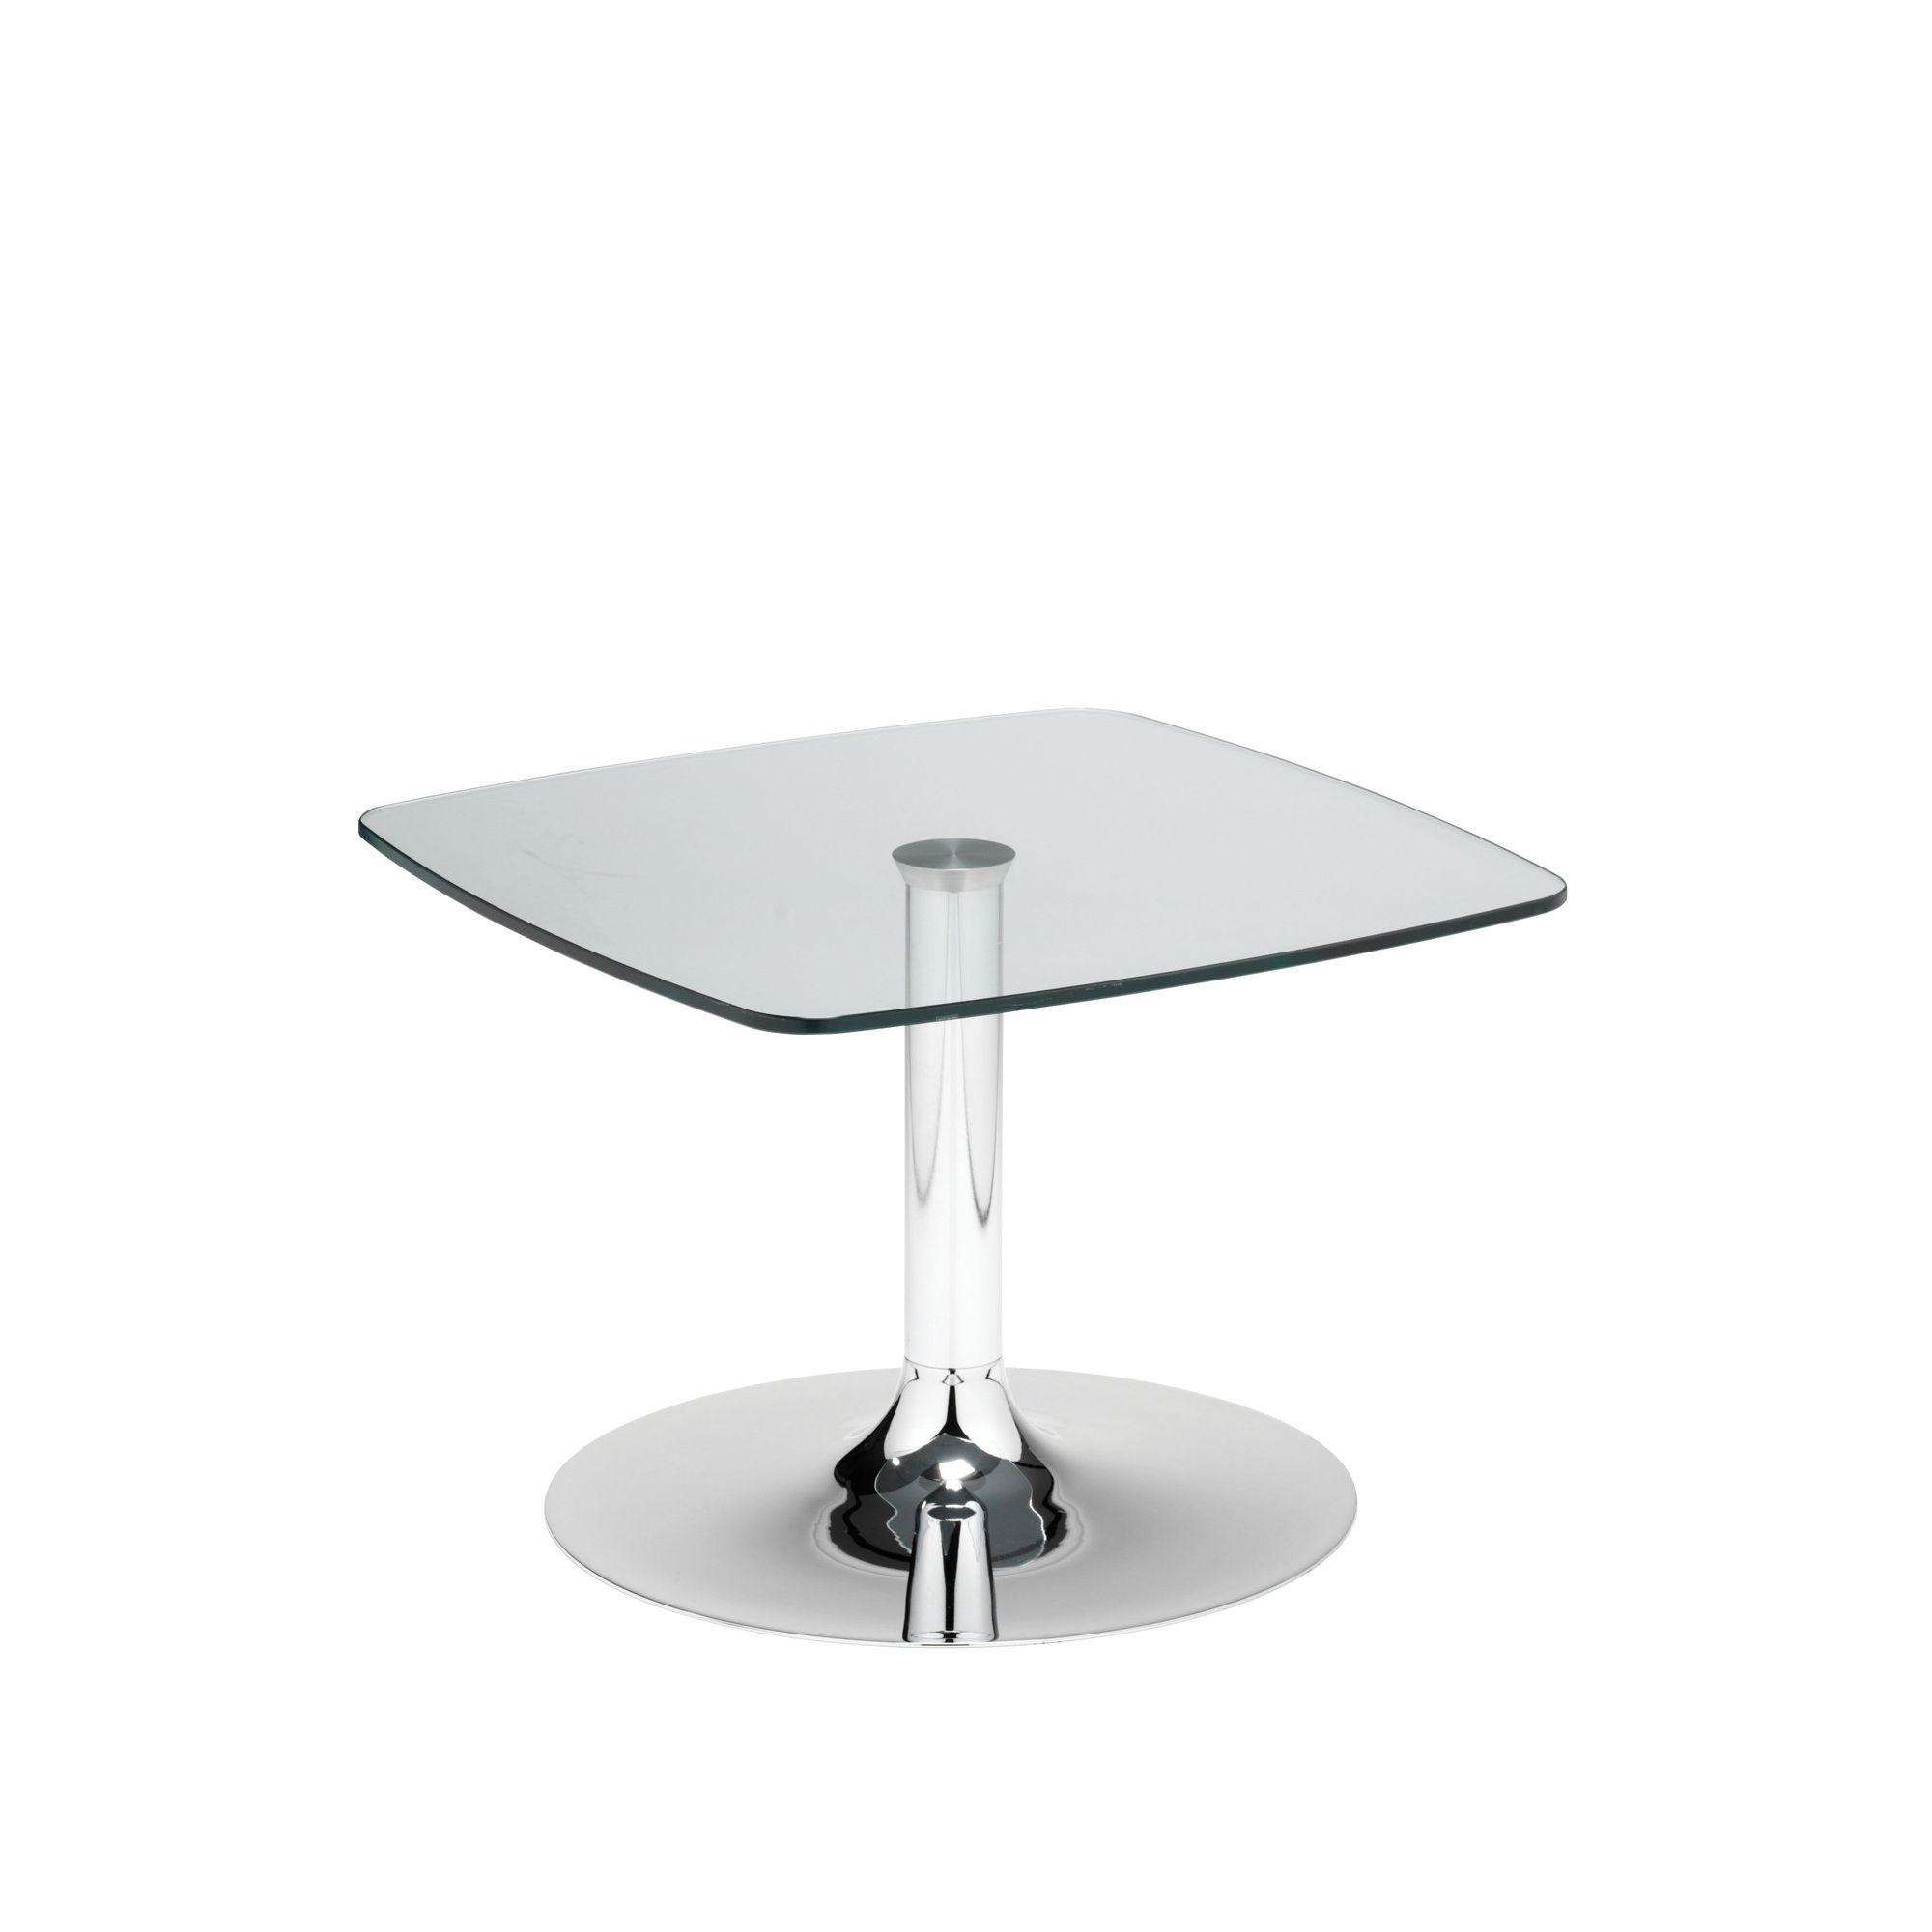 Ocee Design Venalo Trumpet Base Coffee Table at Tesco Direct